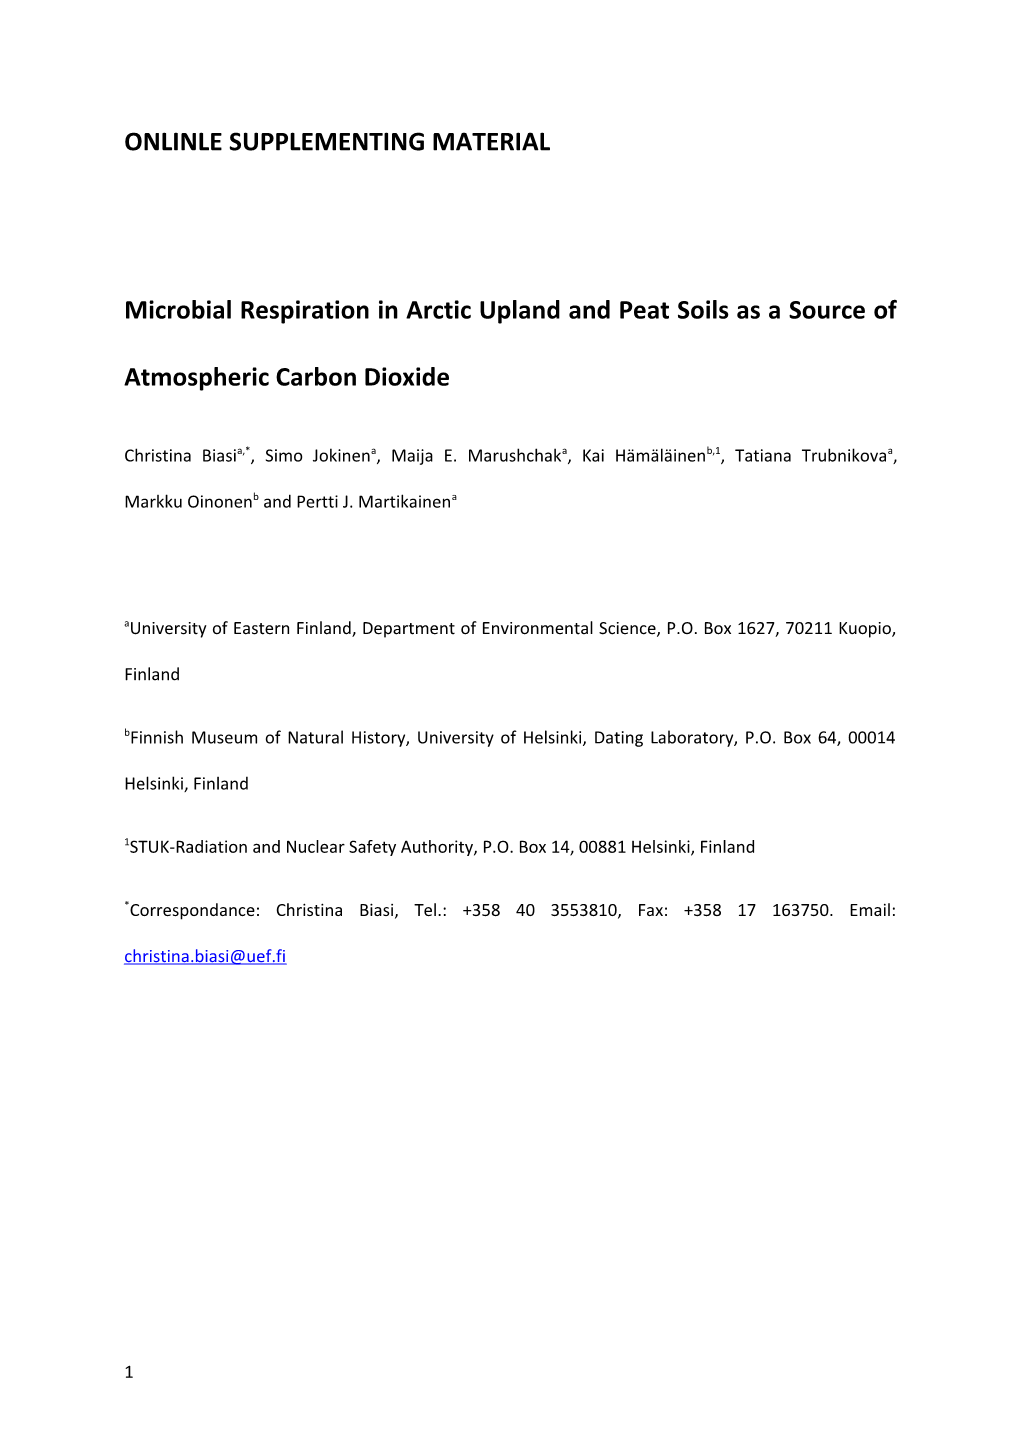 Microbial Respiration in Arctic Upland and Peat Soils As a Source of Atmospheric Carbon